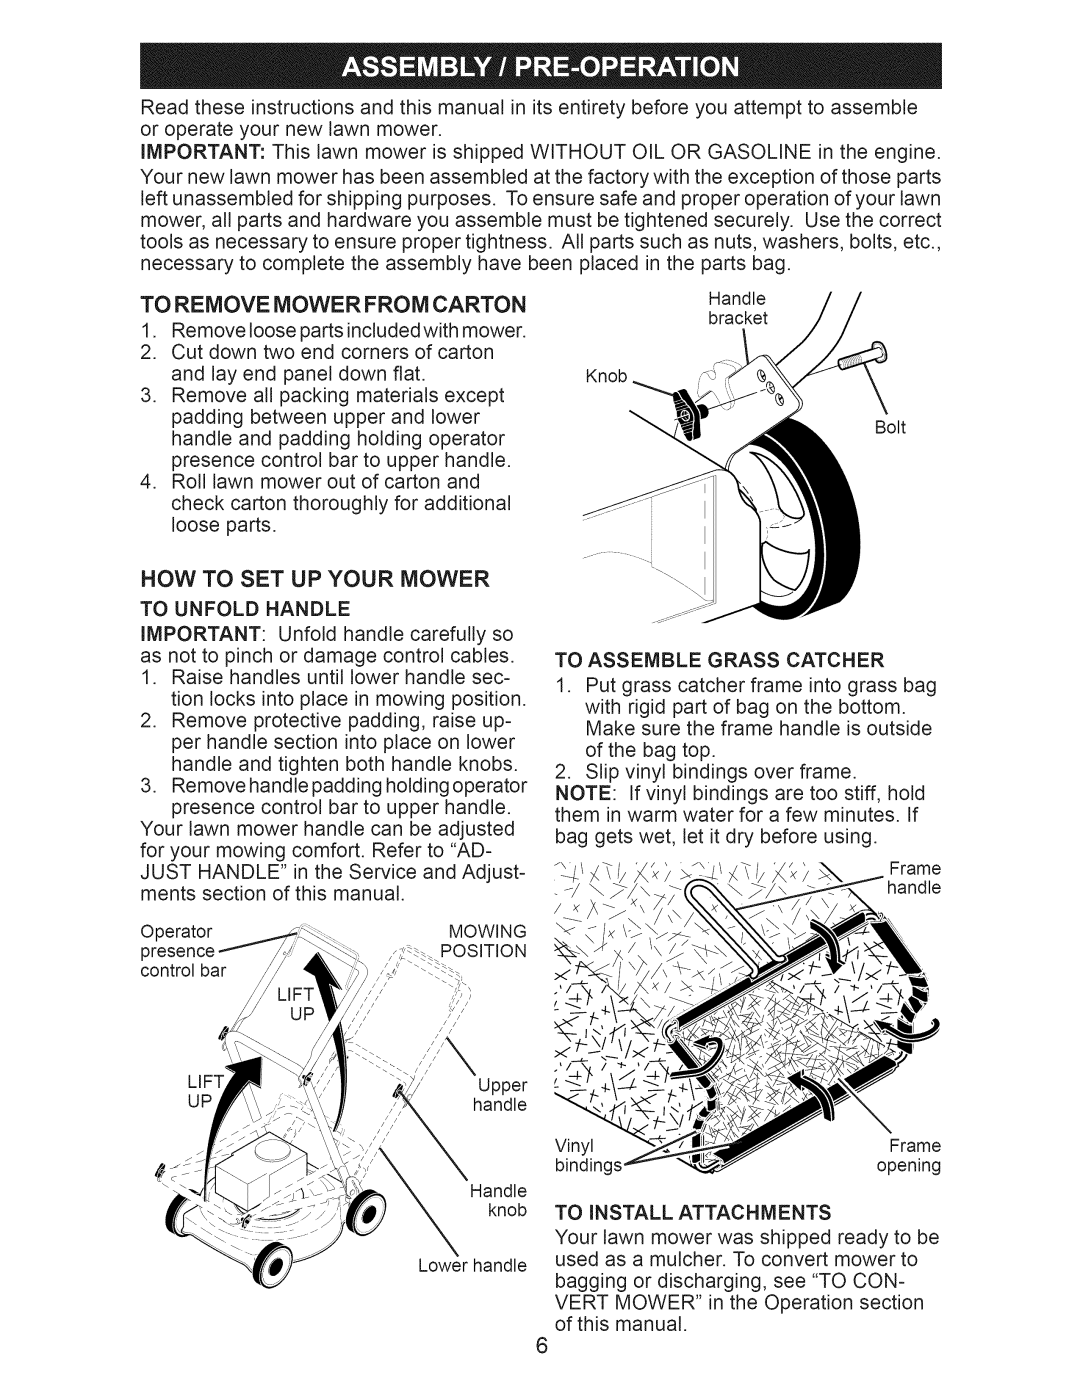 Craftsman 917.376390 manual To Remove Mower From Carton, Now To Set Up Your Mower 